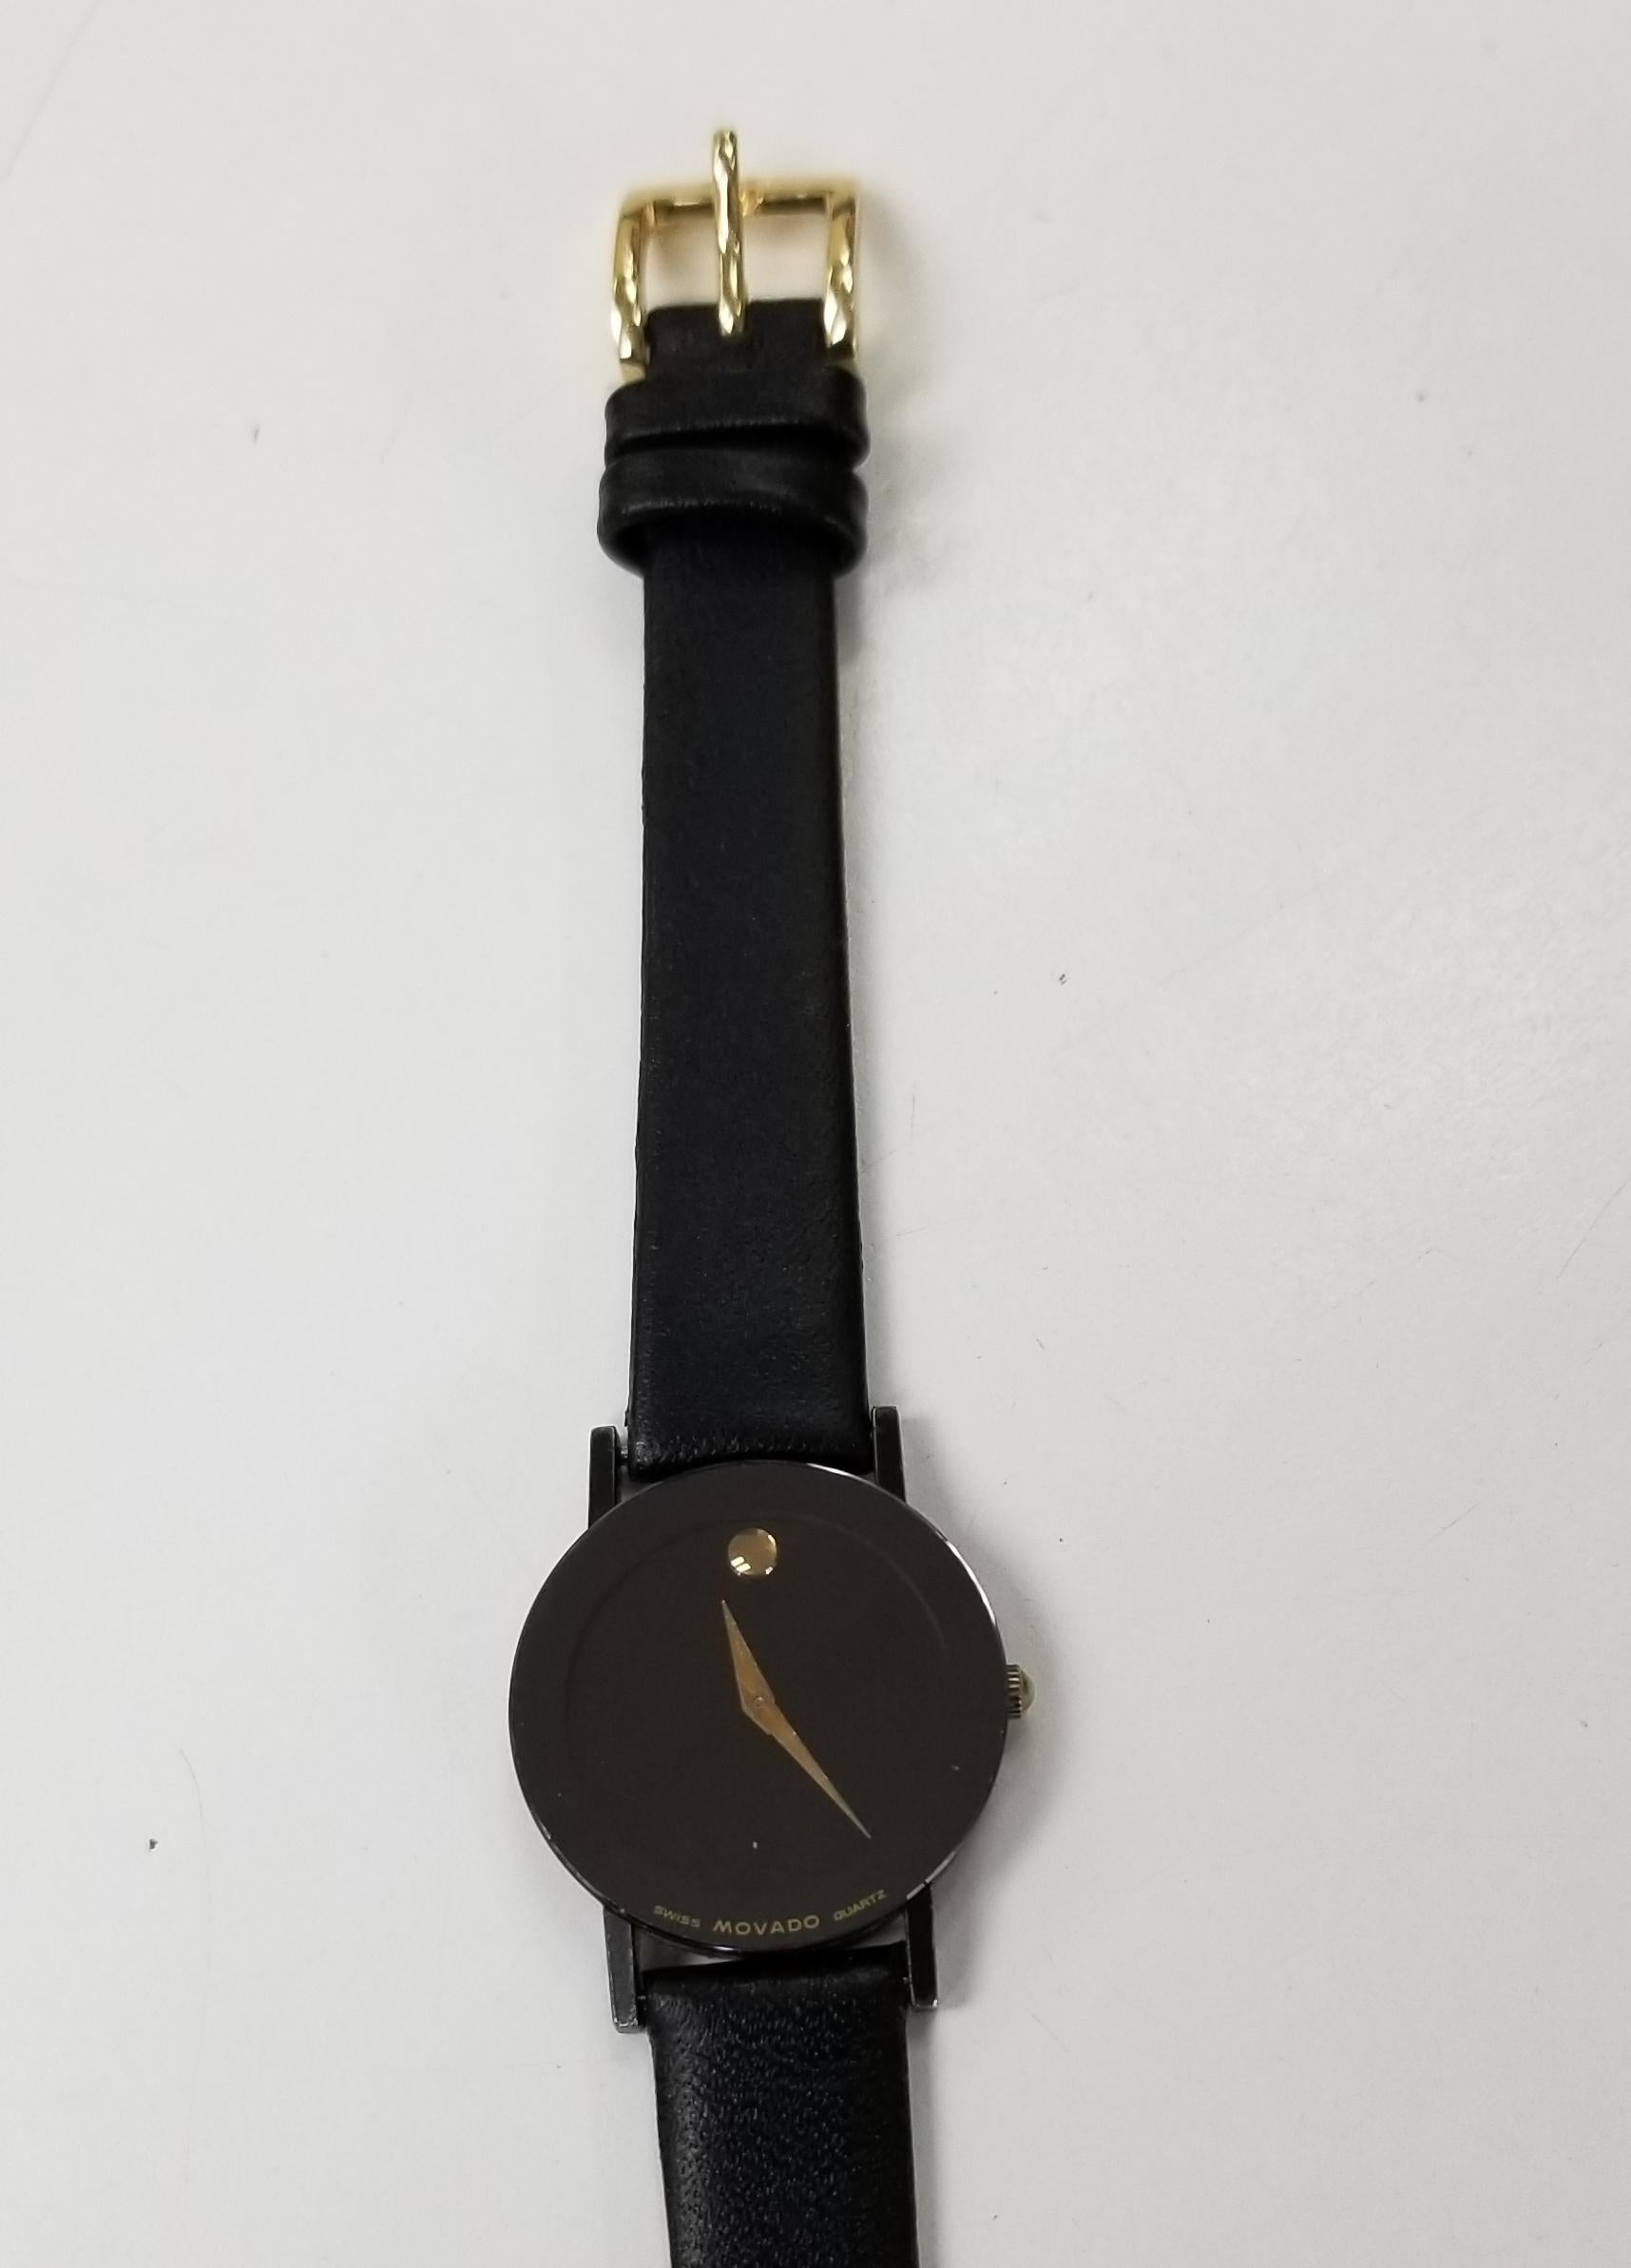 AUTHENTIC 25mm SWISS MOVADO SAPPHIRE CLASSIC ULTRA THIN PVD CASE LADIES WATCH, in very good condition and in the original box with instructions.